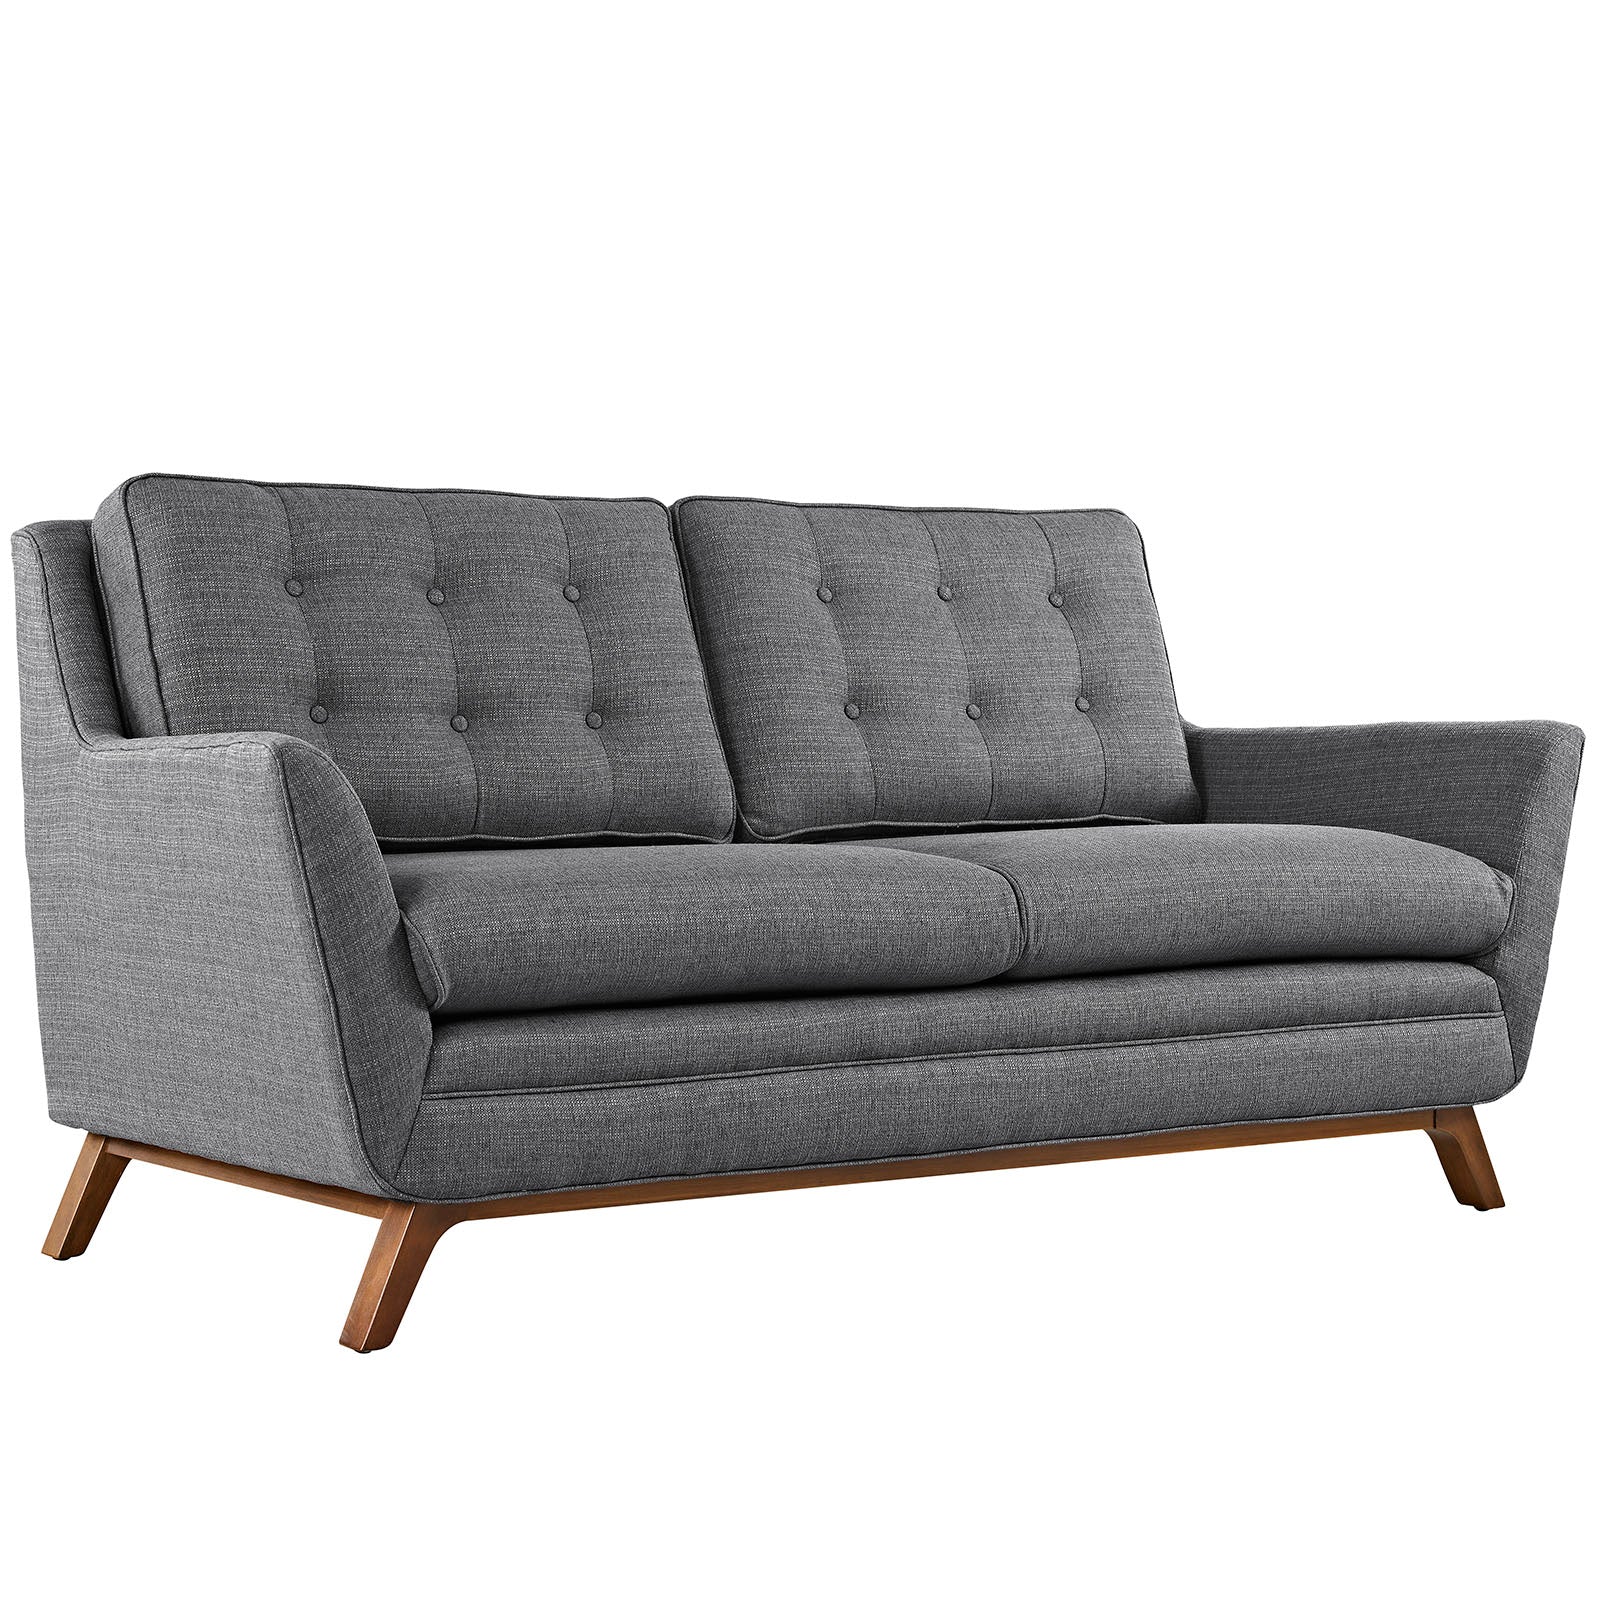 Modway Loveseats - Beguile Upholstered Fabric Loveseat Gray